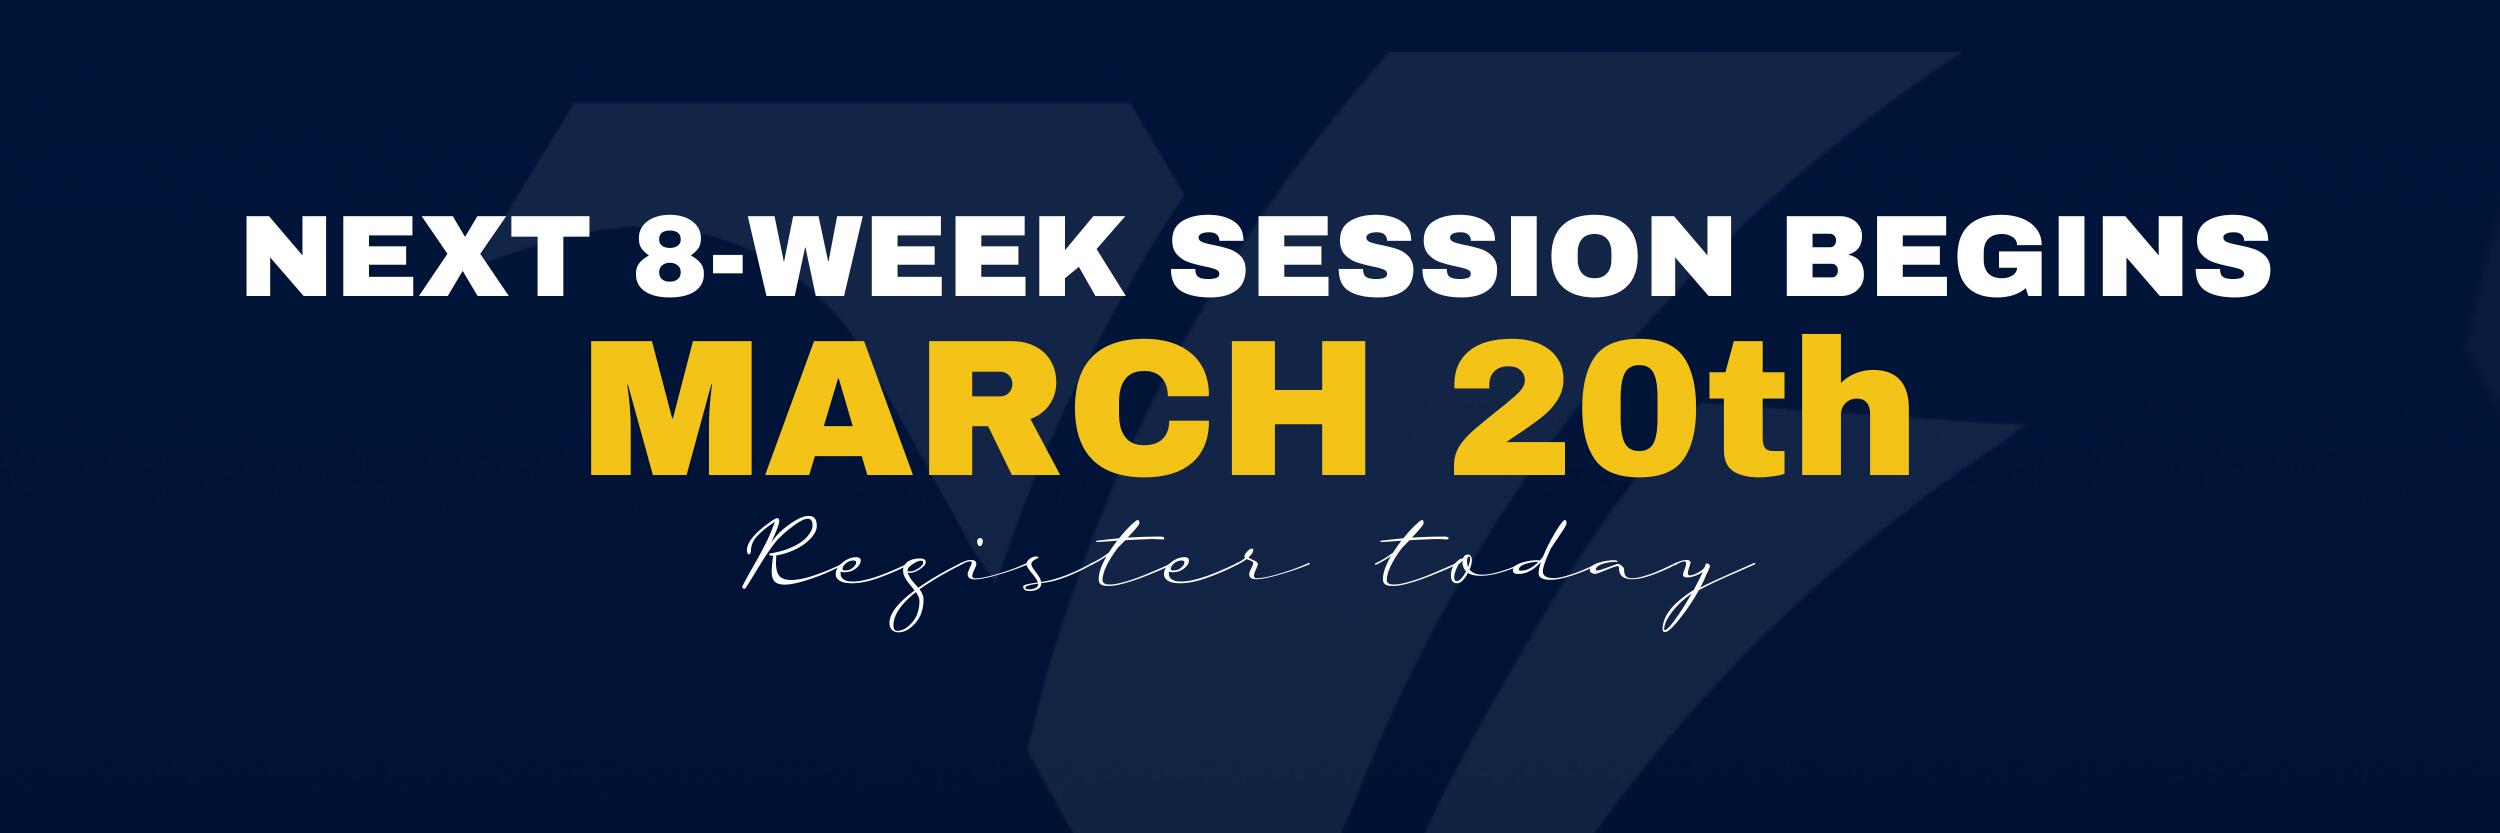 Next 8-Week Session Begins March 20 graphic